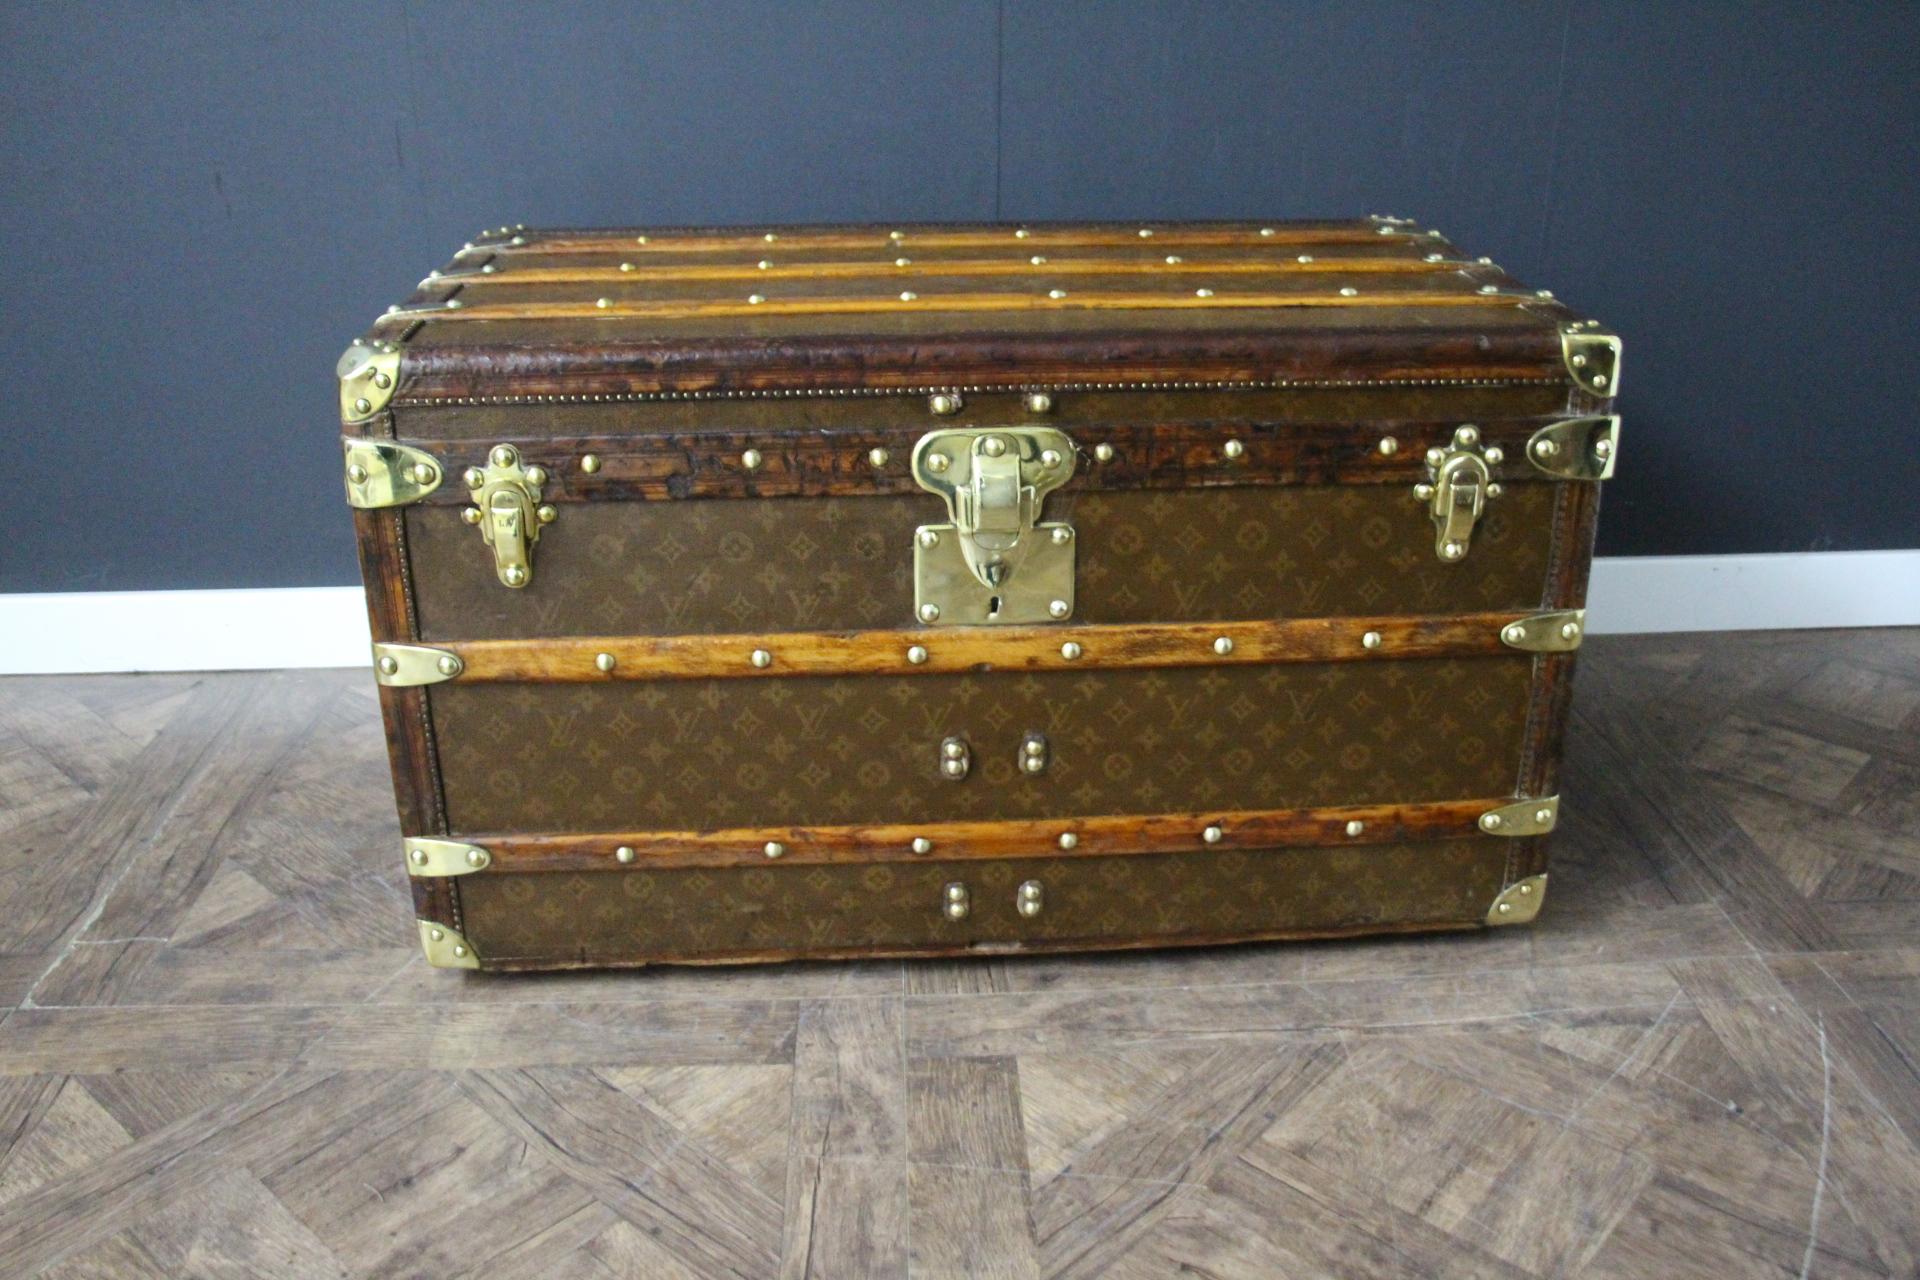 This superb Louis Vuitton steamer trunk features hand painted stenciled monogram canvas, deep chocolate color leather trim, Louis Vuitton stamped solid brass locks, clasps and studs as well as solid brass side handles and brass corners. It features